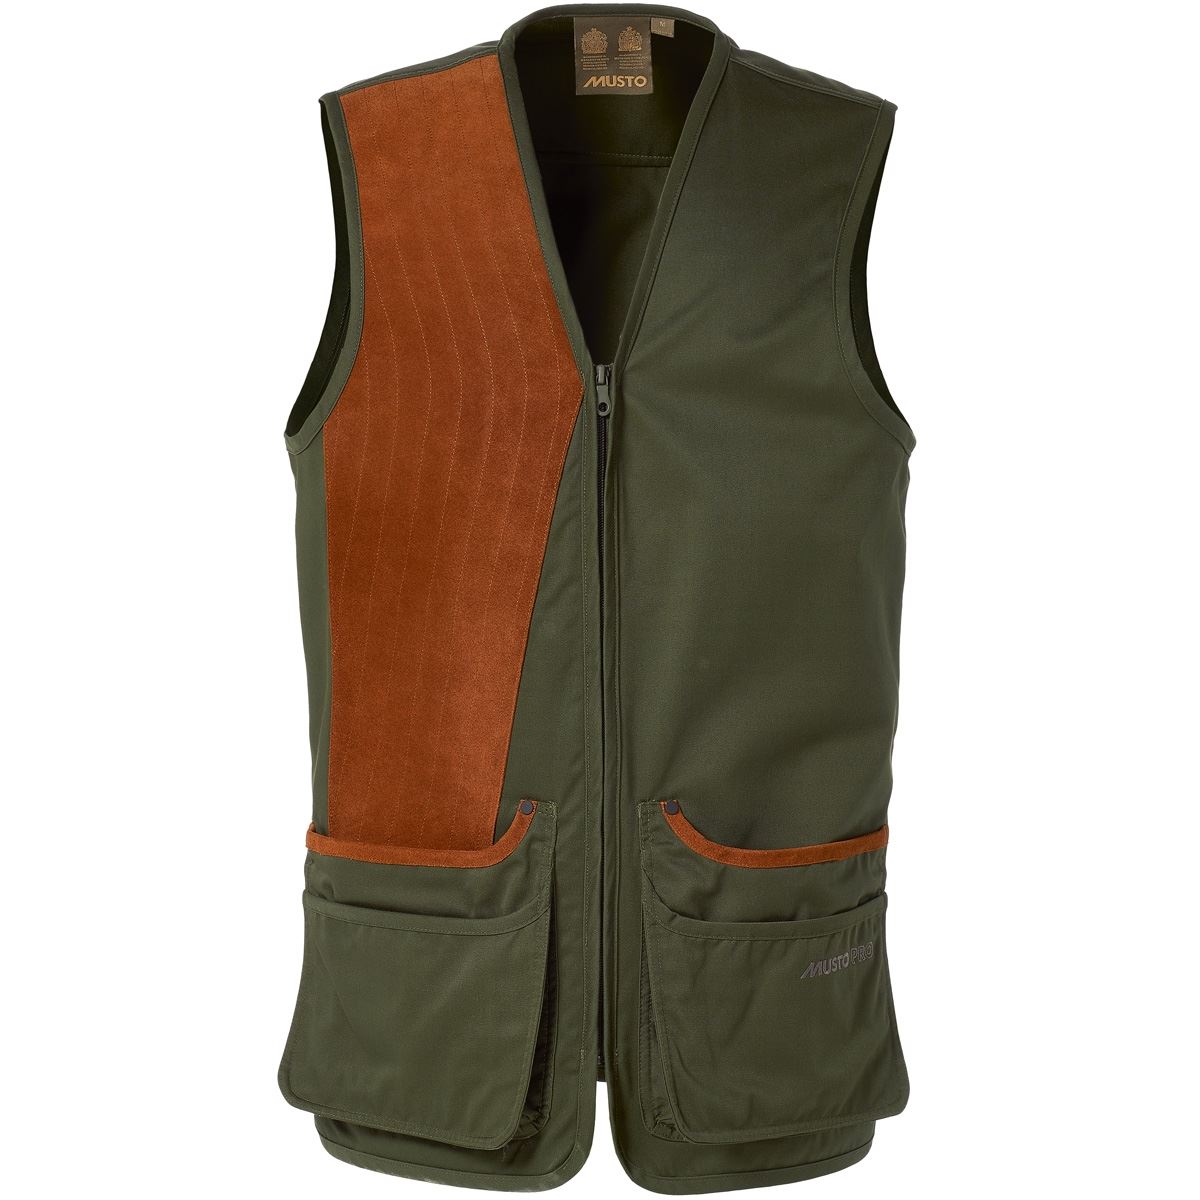 What is the purpose of the Musto shooting vest for clay shooting?